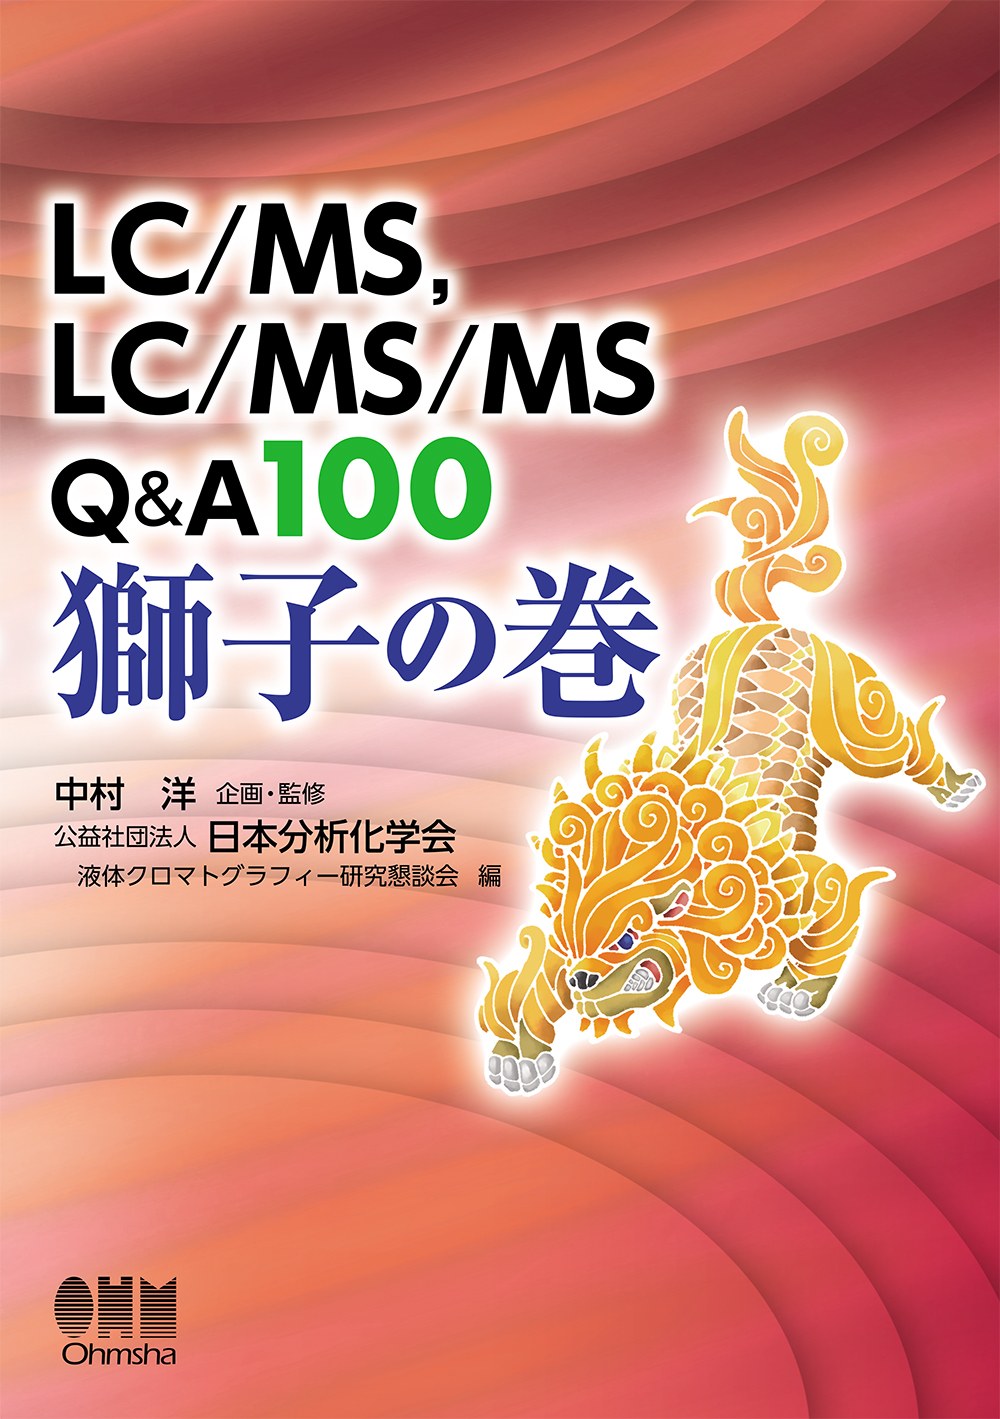 LC/MS、LC/MS/MS　Q&A100　獅子の巻の商品画像